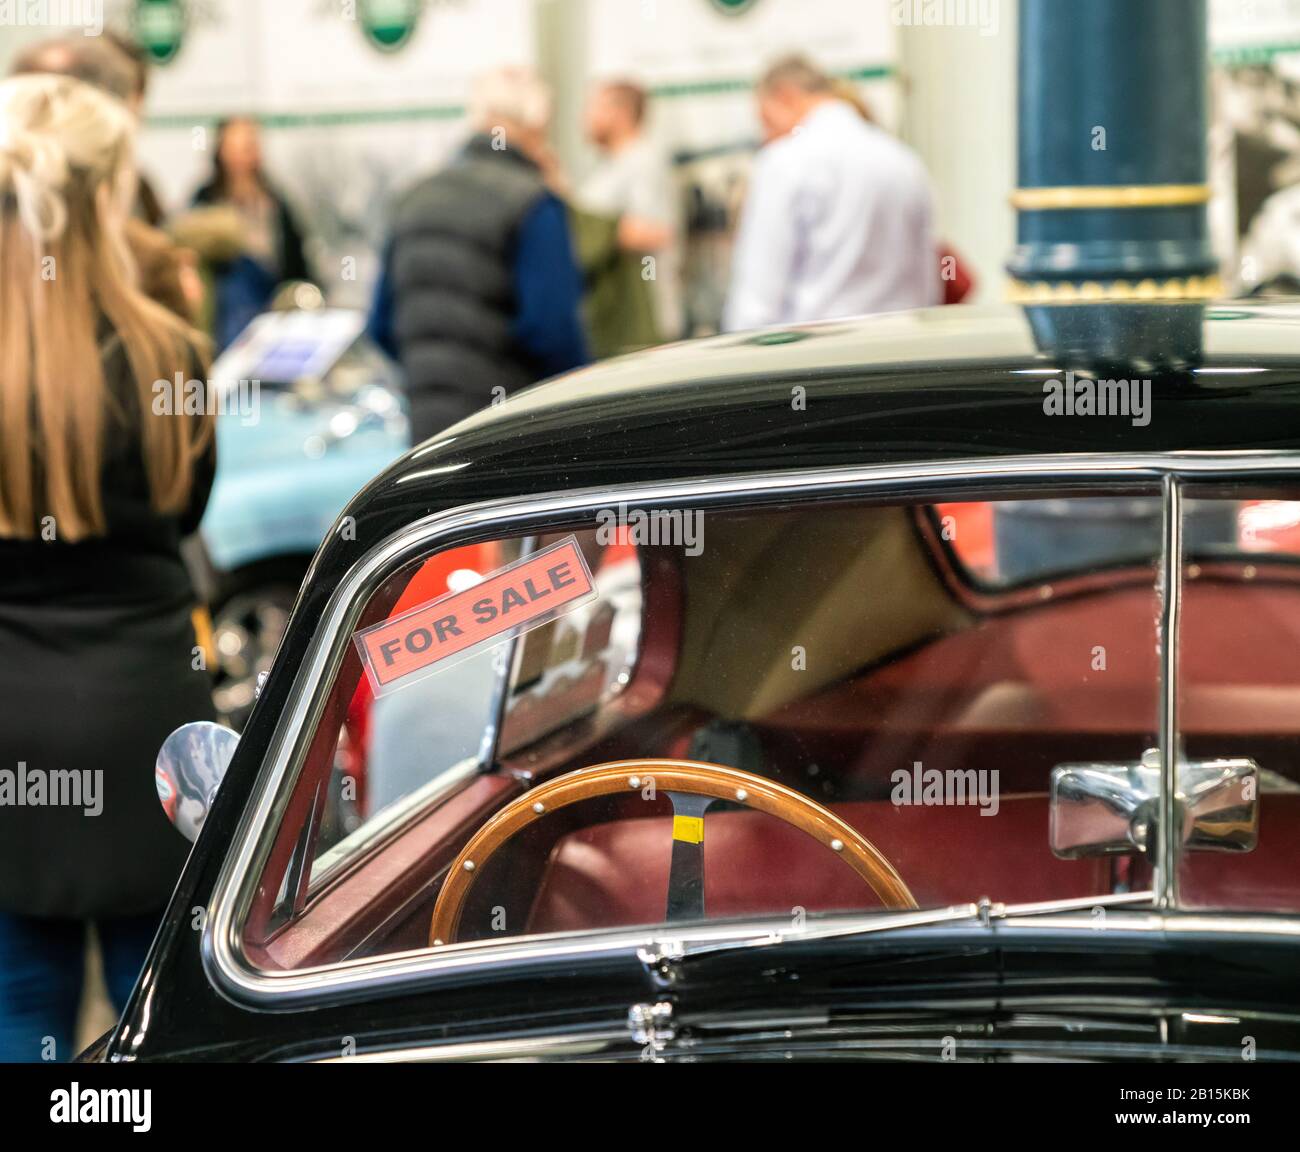 22 Feb 2020 - London, UK. Close up detail of a classic car advertised for sale in the exhibition. Stock Photo